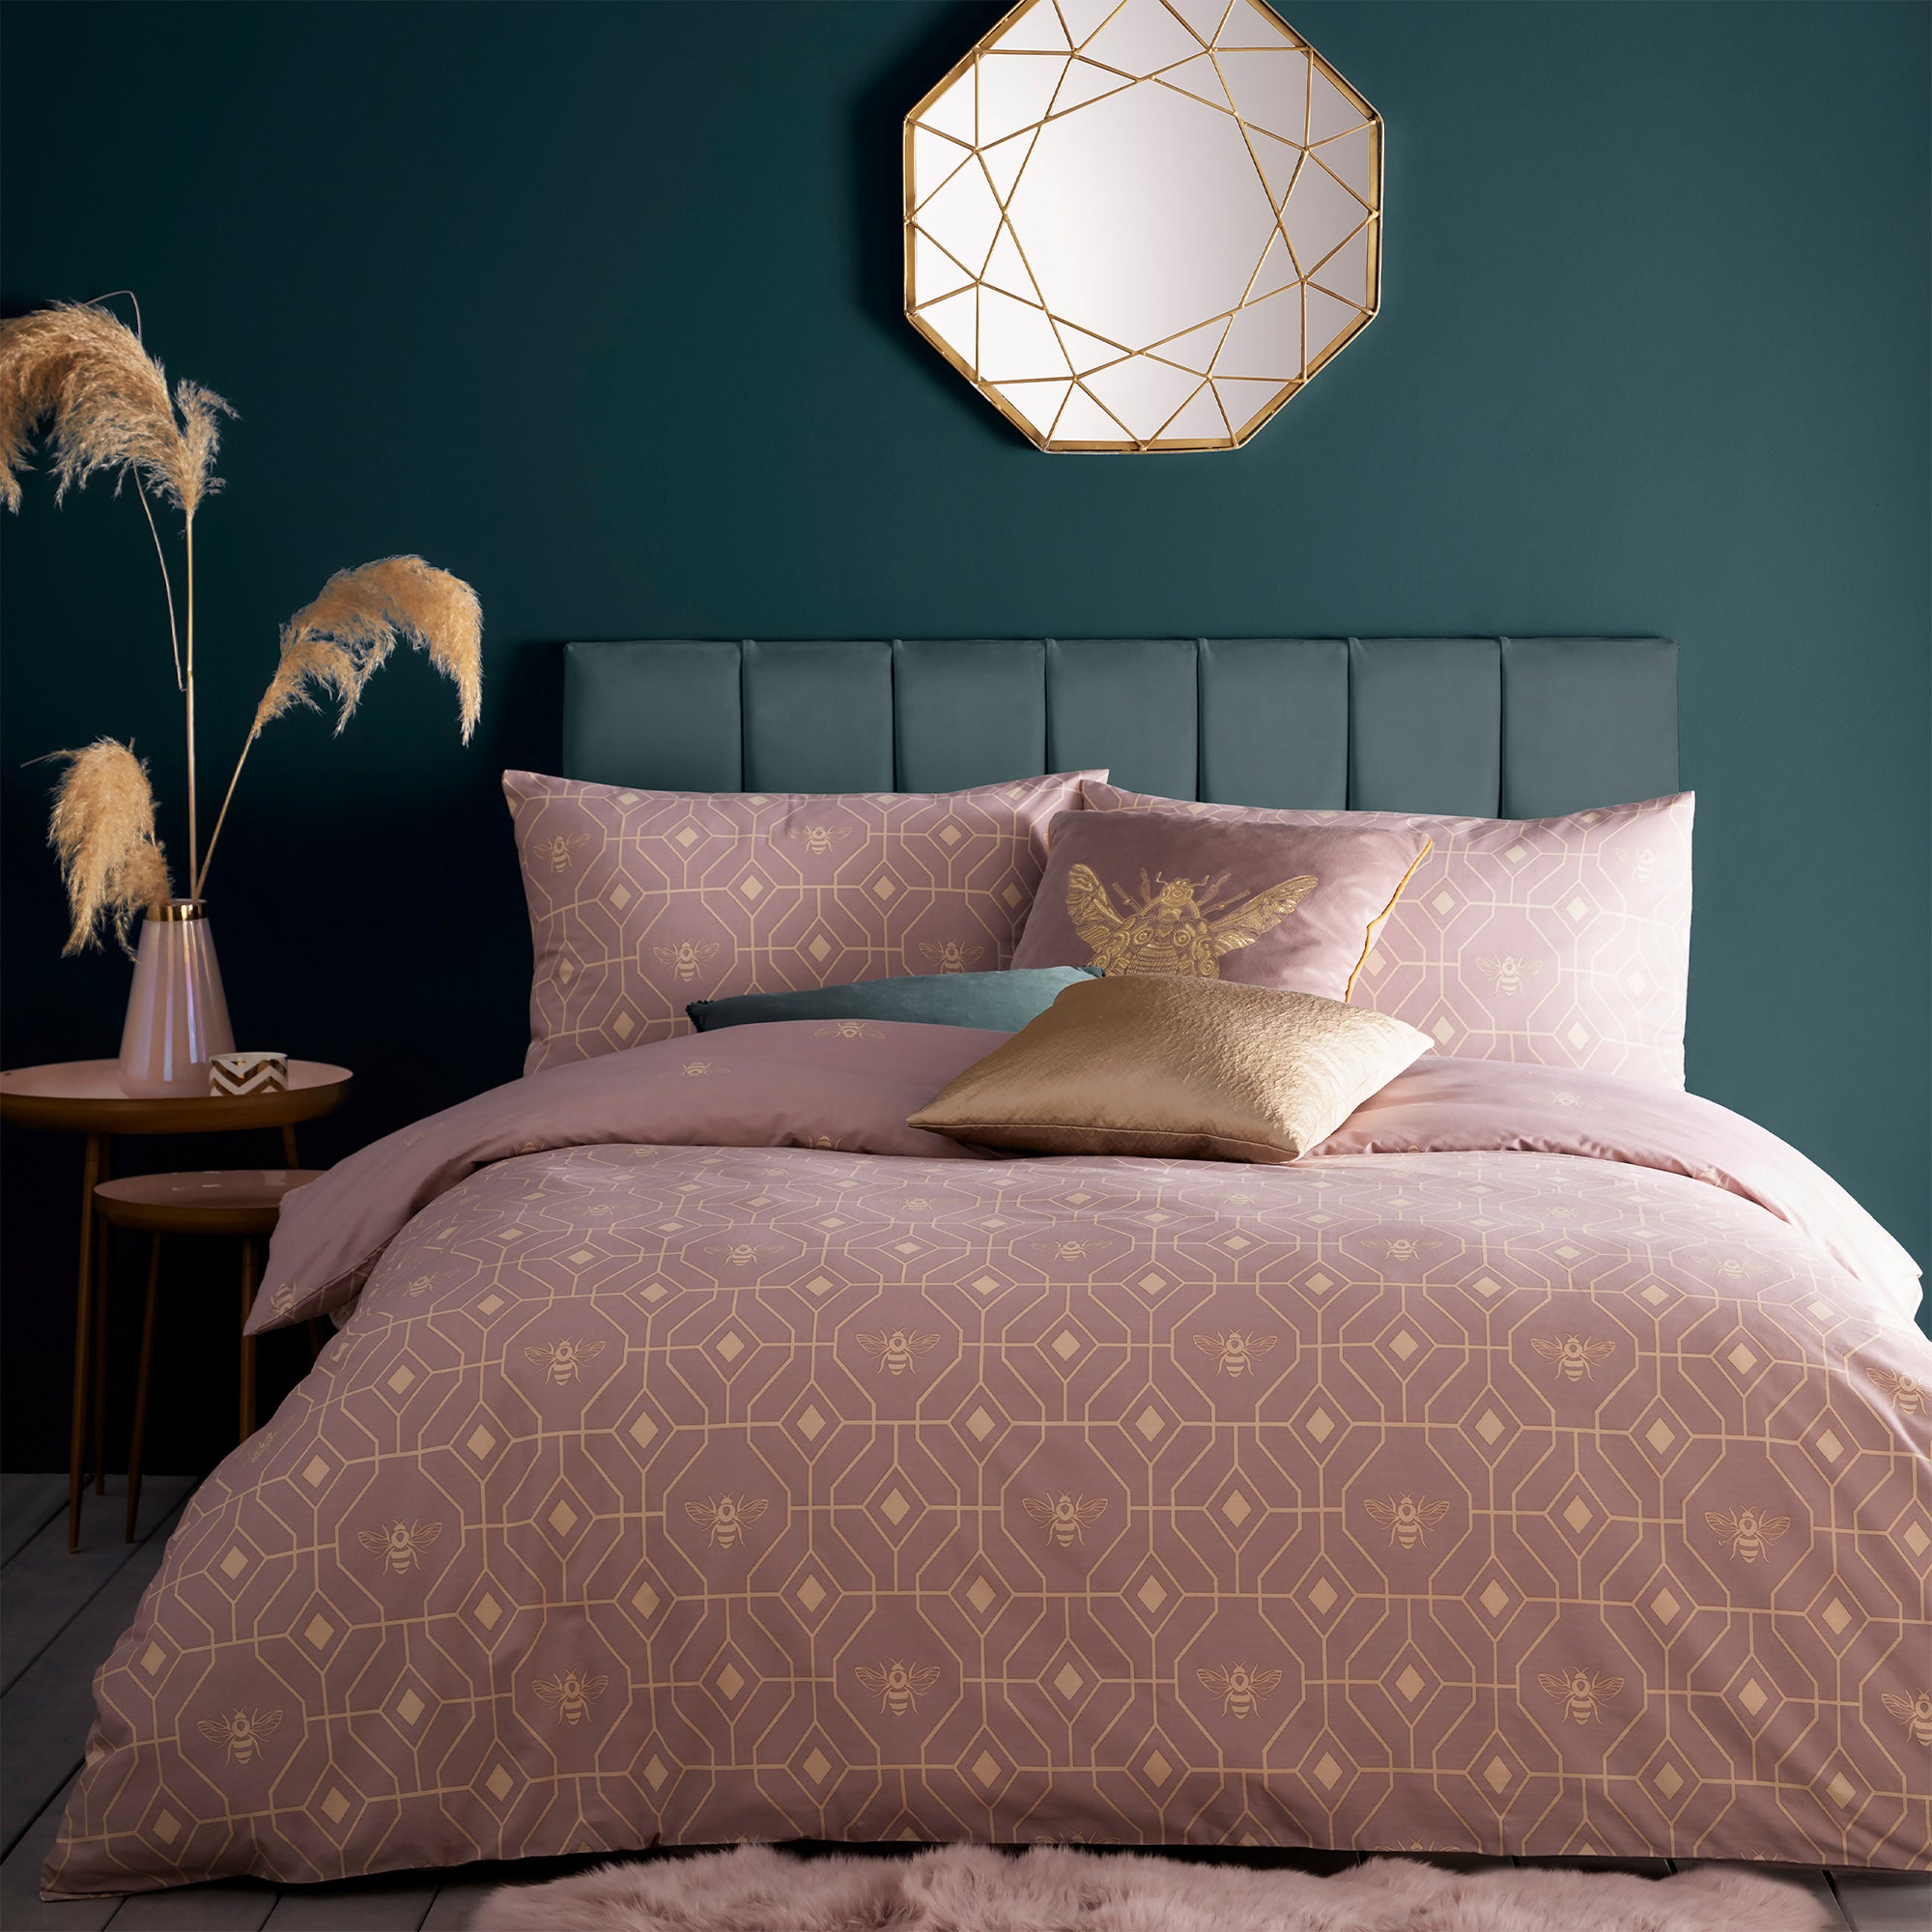 How to Style a Brass Bed